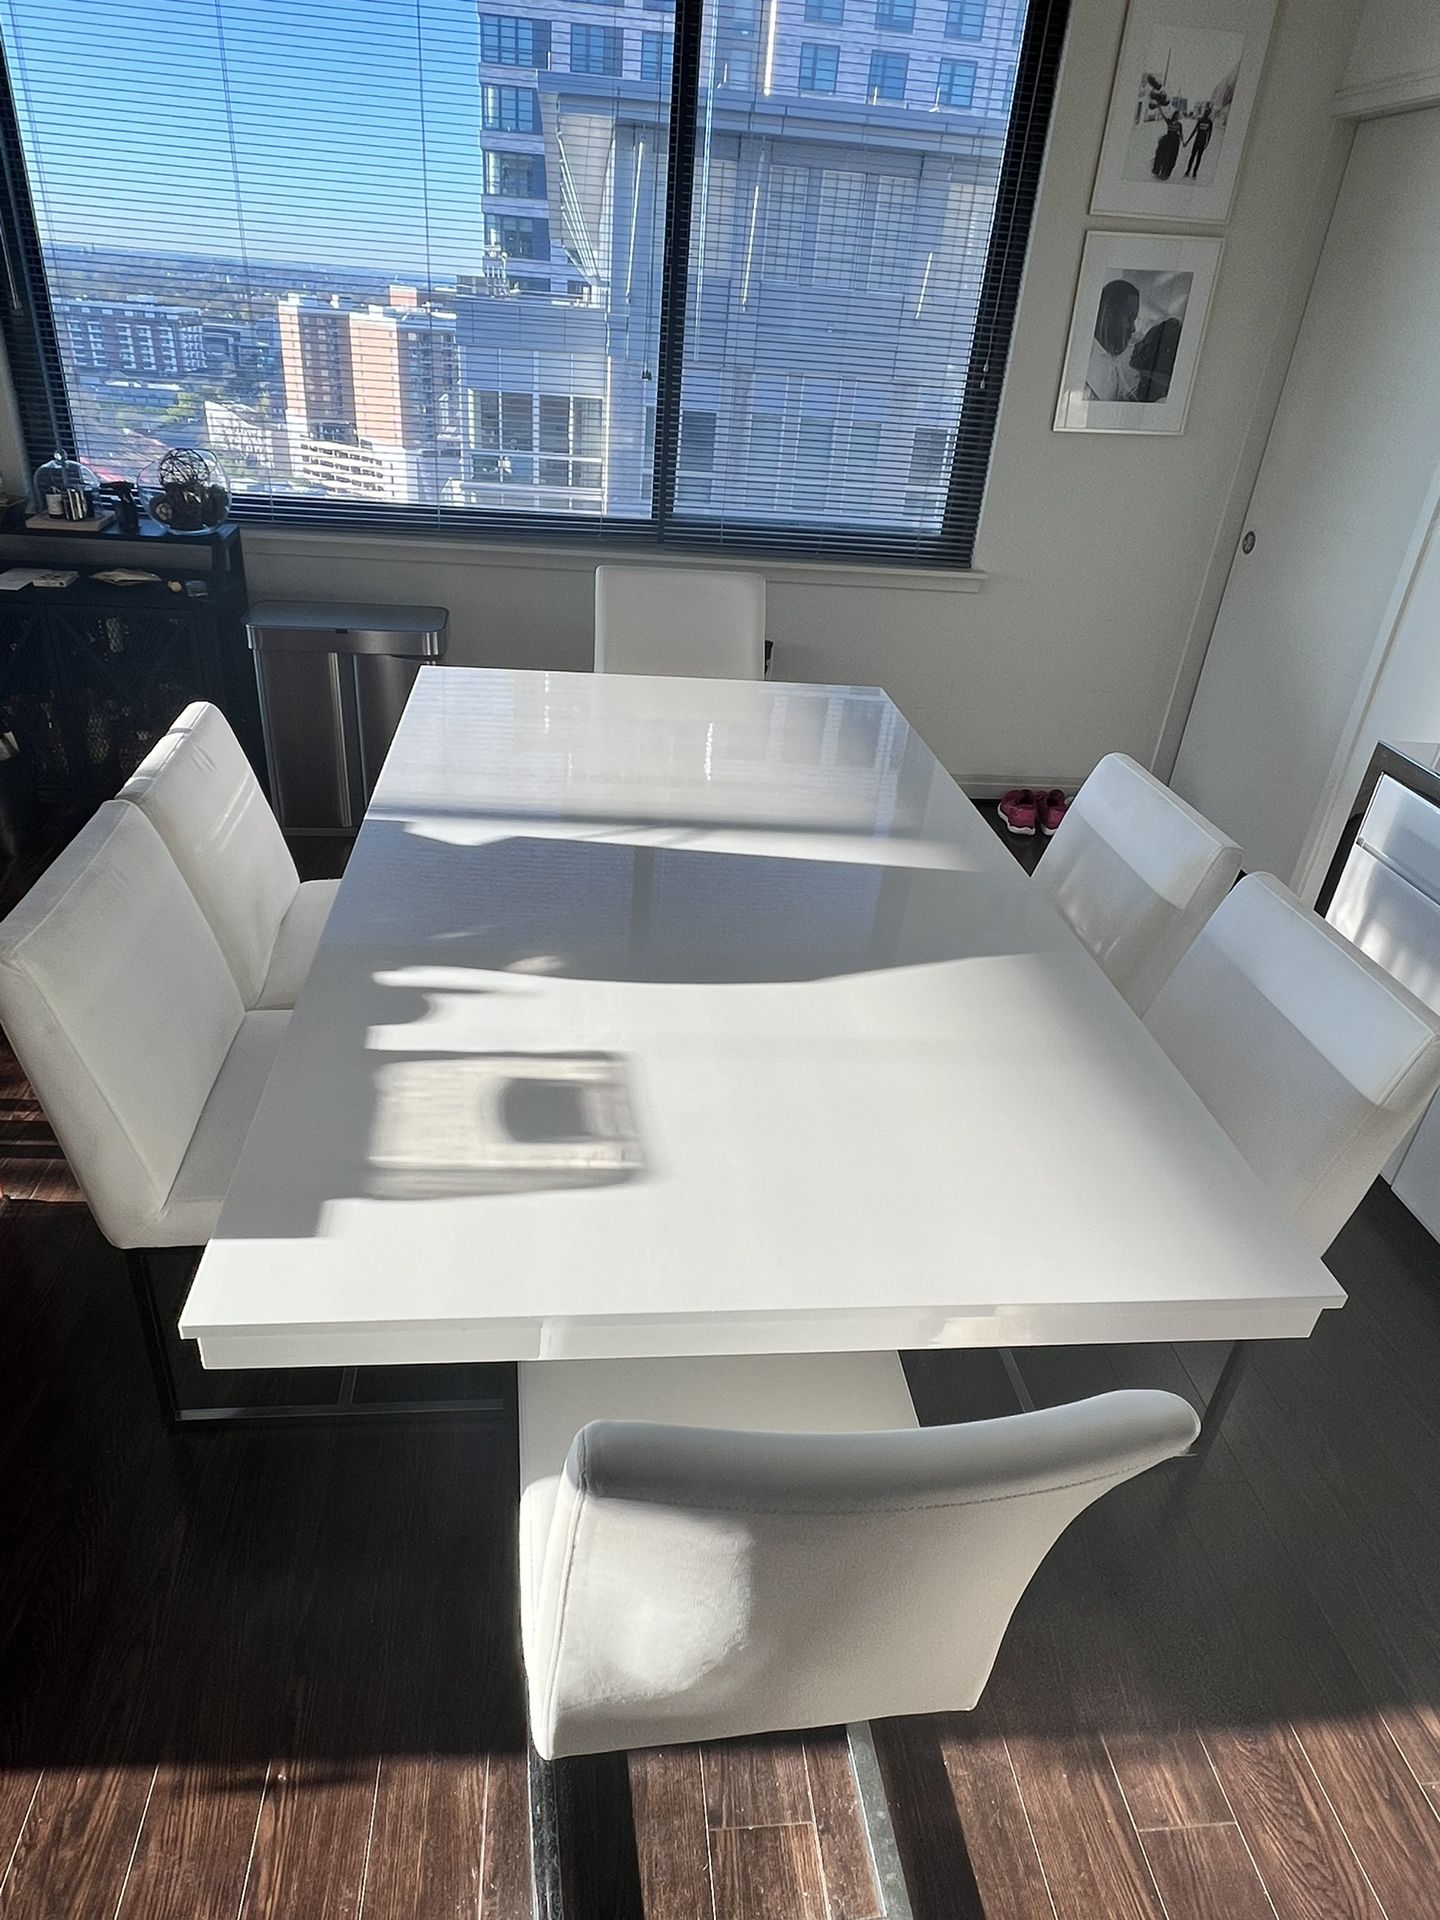 City Furniture Miami White Dining Table And 6 Chairs - $450 OBO